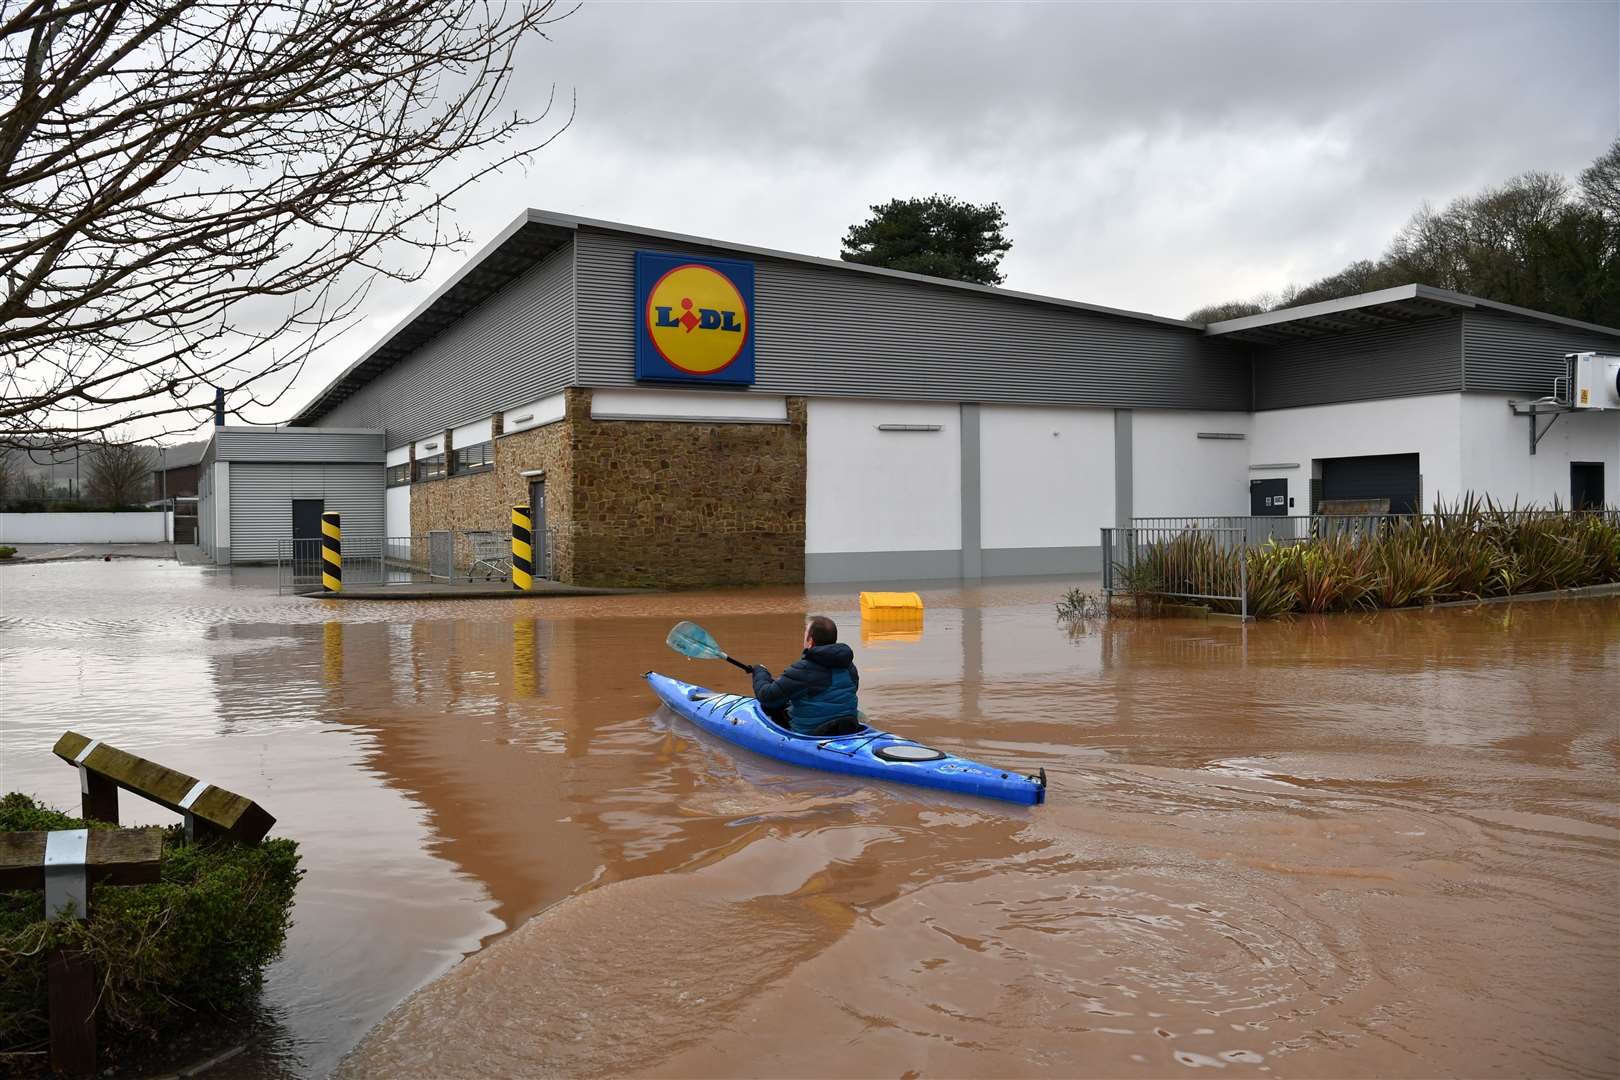 A canoeist makes their way towards Lidl in Monmouth in the aftermath of Storm Dennis in February 2020 (Ben Birchall/PA)